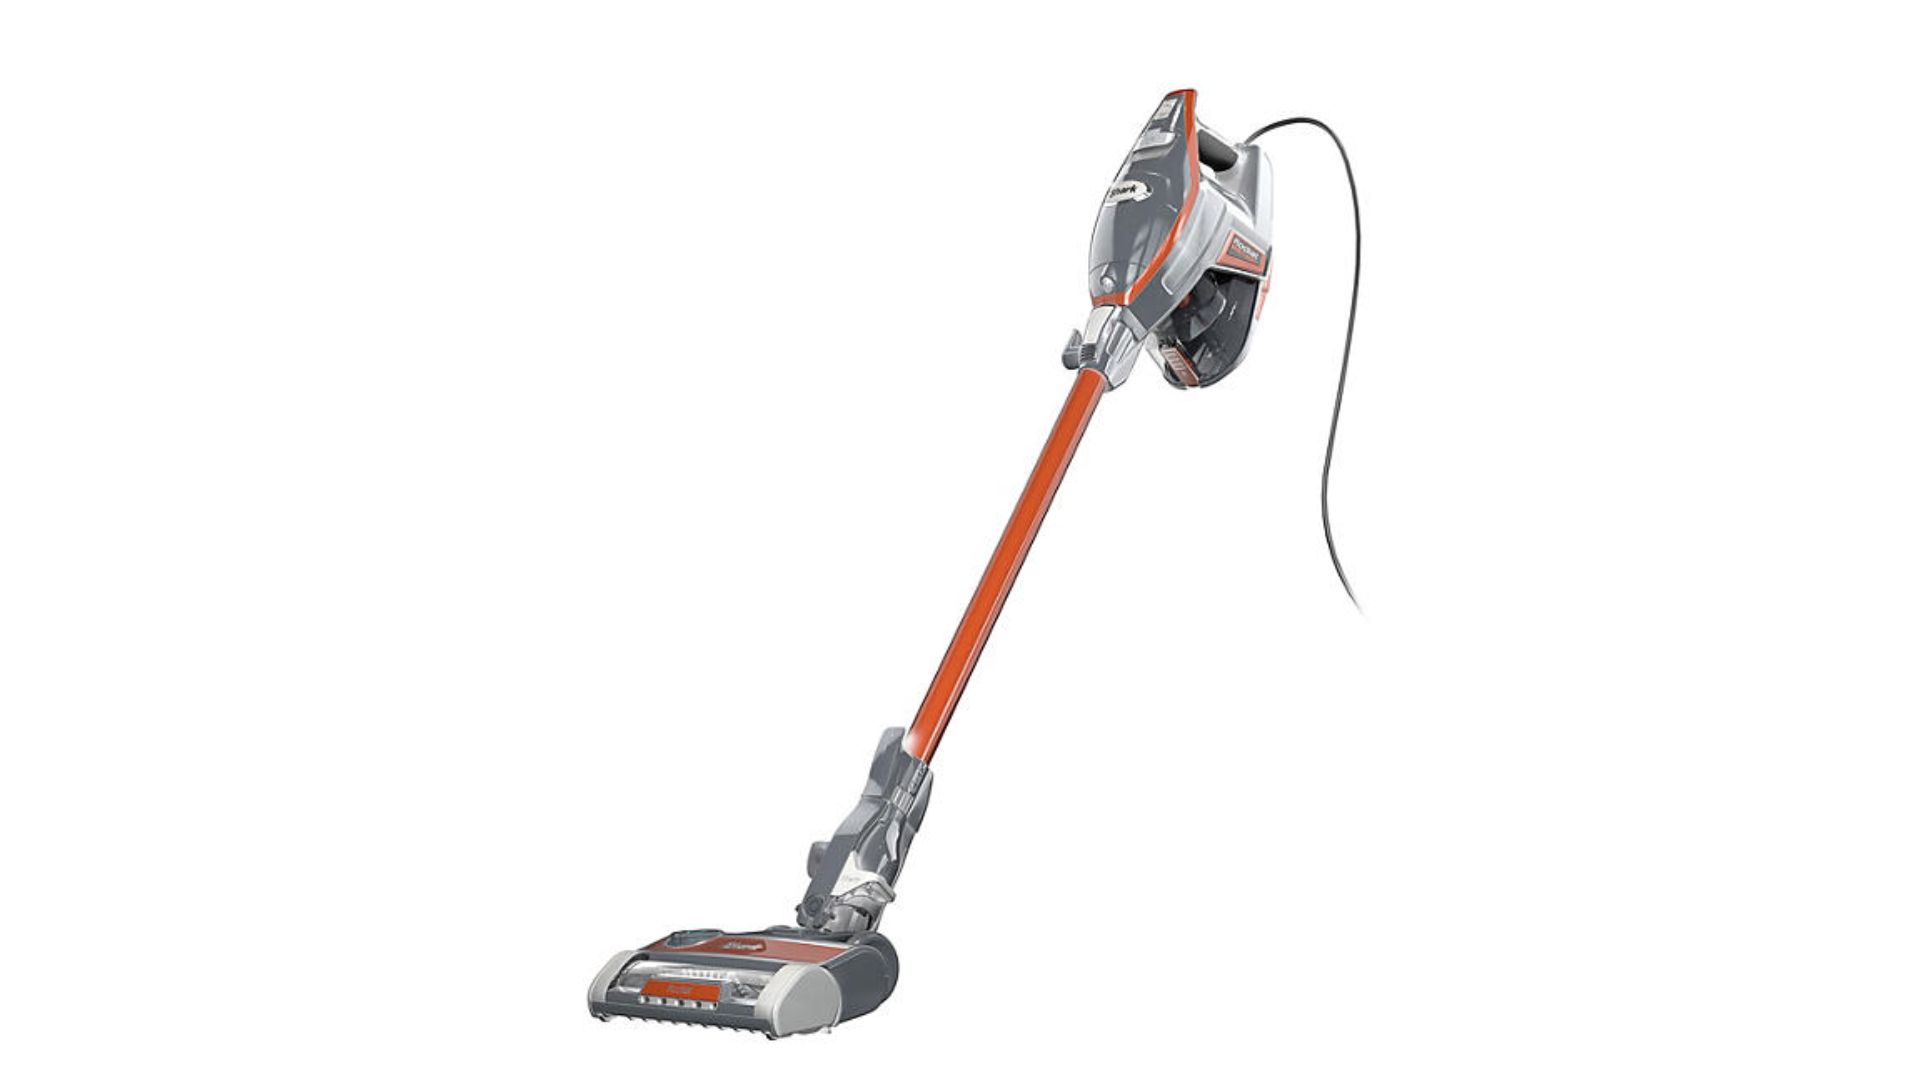 <p>The season to deep clean every inch of your home has arrived, so a new vacuum can be a great investment. Sam's Club is currently offering deep discounts you might not be able to pass up.</p> <p>Regularly priced at $289.98, the Shark Rotator Pet Pro Lift-Away ADV Upright Vacuum With Odor Neutralizer Technology is currently $70 off, bringing its sale price to $219.98. If you're looking for something more lightweight, the Shark Rocket Pro Corded Stick Vacuum With Odor Neutralizer Technology is on special for $119.98, which is $40 cheaper than its regular price.</p>  <p><strong>More From GOBankingRates</strong></p>   <ul> <li><a href="https://www.gobankingrates.com/retirement/planning/downsizing-for-retirement-avoid-these-mistakes/?utm_term=incontent_link_3&utm_campaign=1265761&utm_source=msn.com&utm_content=8&utm_medium=rss" rel=""><strong>Downsizing for Retirement? Avoid These 6 Mistakes</strong></a></li> <li><a href="https://www.gobankingrates.com/money/wealth/rare-coins-that-sold-for-at-least-600000/?utm_term=incontent_link_4&utm_campaign=1265761&utm_source=msn.com&utm_content=9&utm_medium=rss" rel=""><strong>5 Rare Coins That Sold for At Least $600,000</strong></a></li> <li><a href="https://www.gobankingrates.com/saving-money/food/these-aldi-brand-products-are-worth-every-penny/?utm_term=incontent_link_5&utm_campaign=1265761&utm_source=msn.com&utm_content=10&utm_medium=rss" rel=""><strong>These 10 Aldi Brand Products Are Worth Every Penny</strong></a></li> <li><strong><a href="https://www.gobankingrates.com/taxes/refunds/biggest-mistake-tax-refund-avoid-it/?utm_term=incontent_link_6&utm_campaign=1265761&utm_source=msn.com&utm_content=11&utm_medium=rss" rel="">The Biggest Mistake People Make With Their Tax Refund -- And How to Avoid It</a></strong></li> </ul>